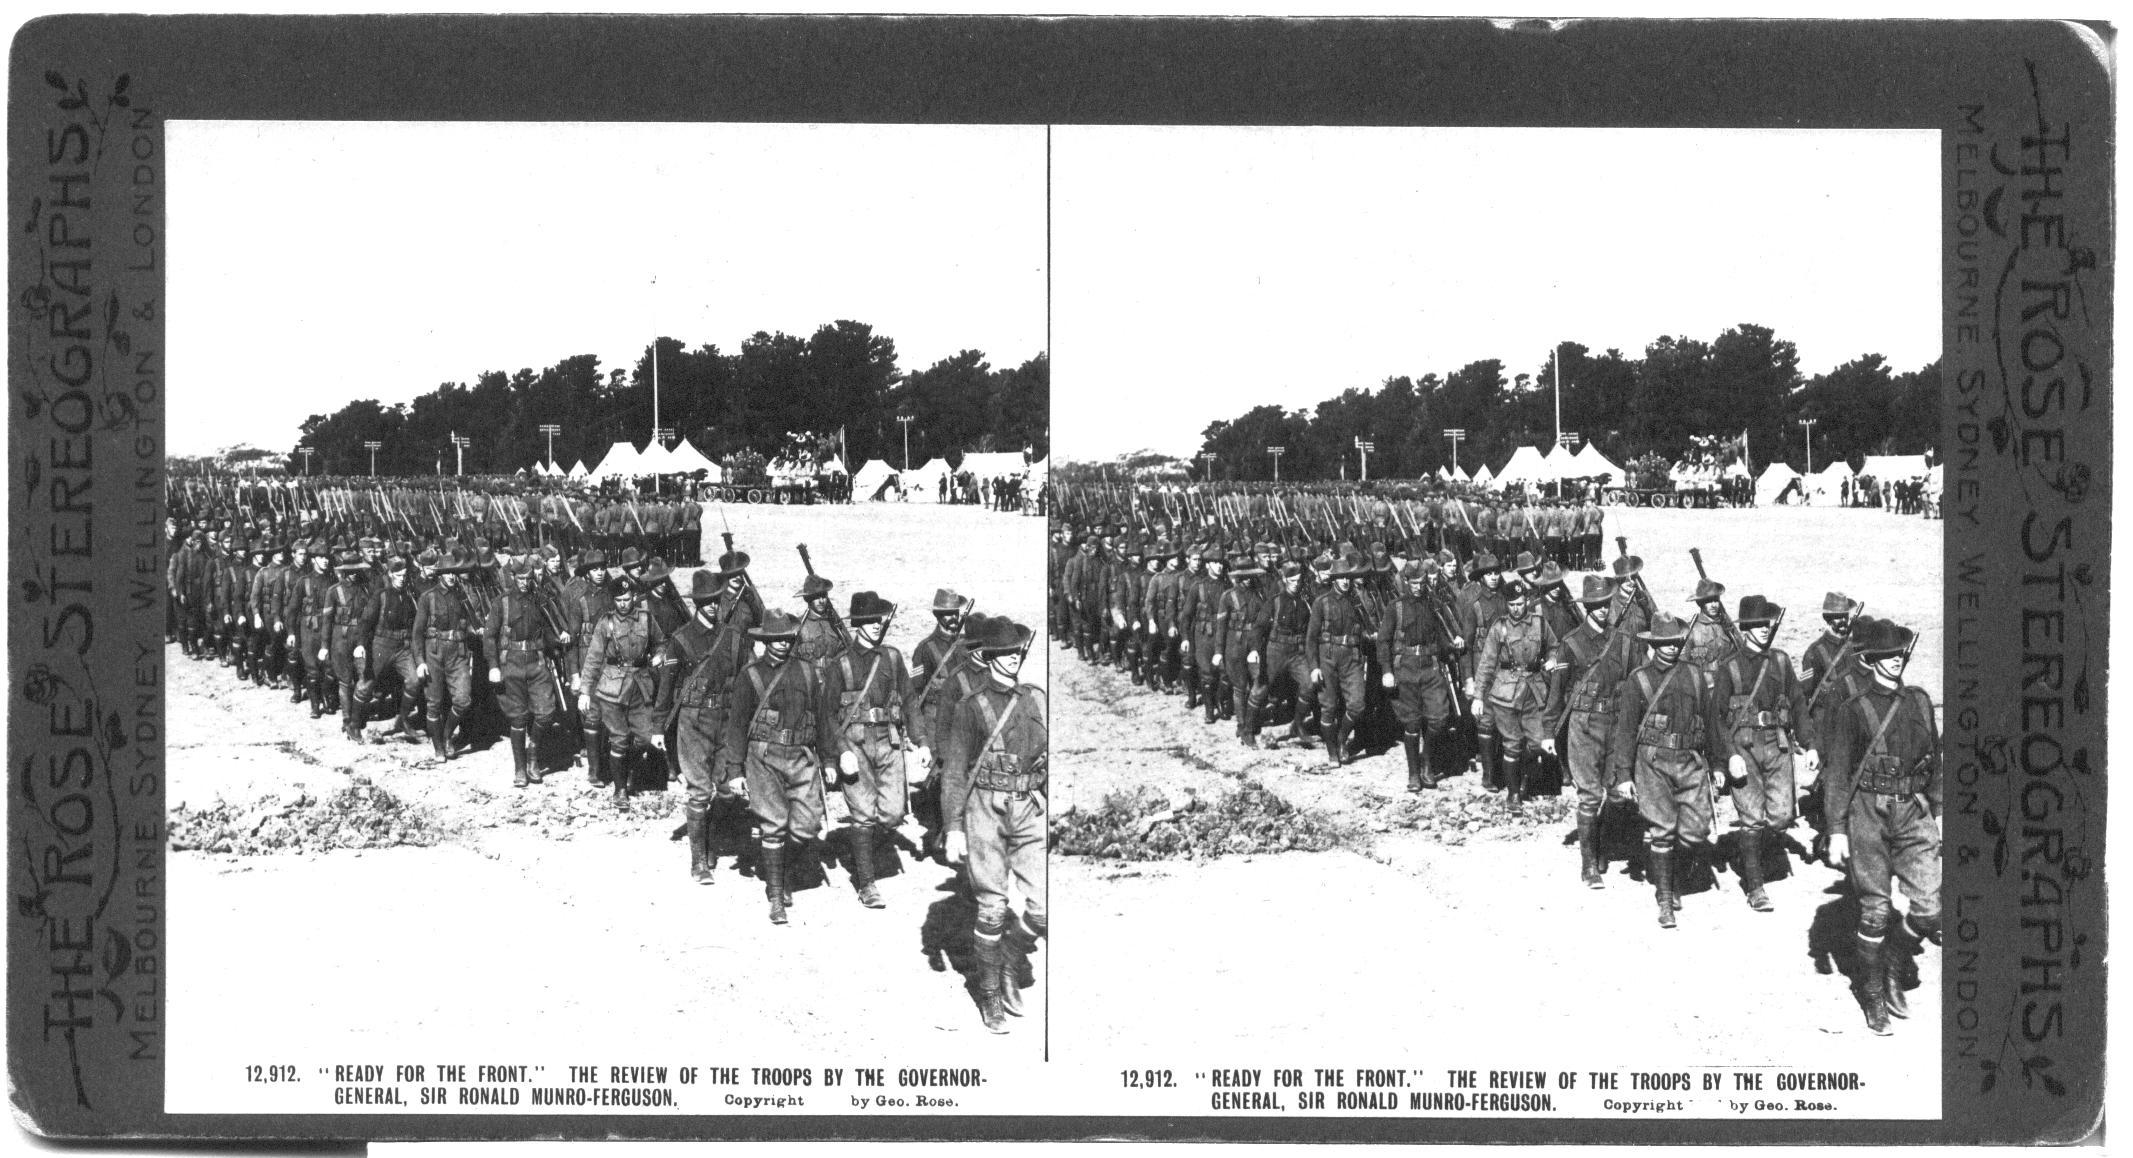 “READY FOR THE FRONT.” THE REVIEW OF THE TROOPS BY THE GOVERNOR- GENERAL, SIR RONALD MUNRO-FERGUSON.